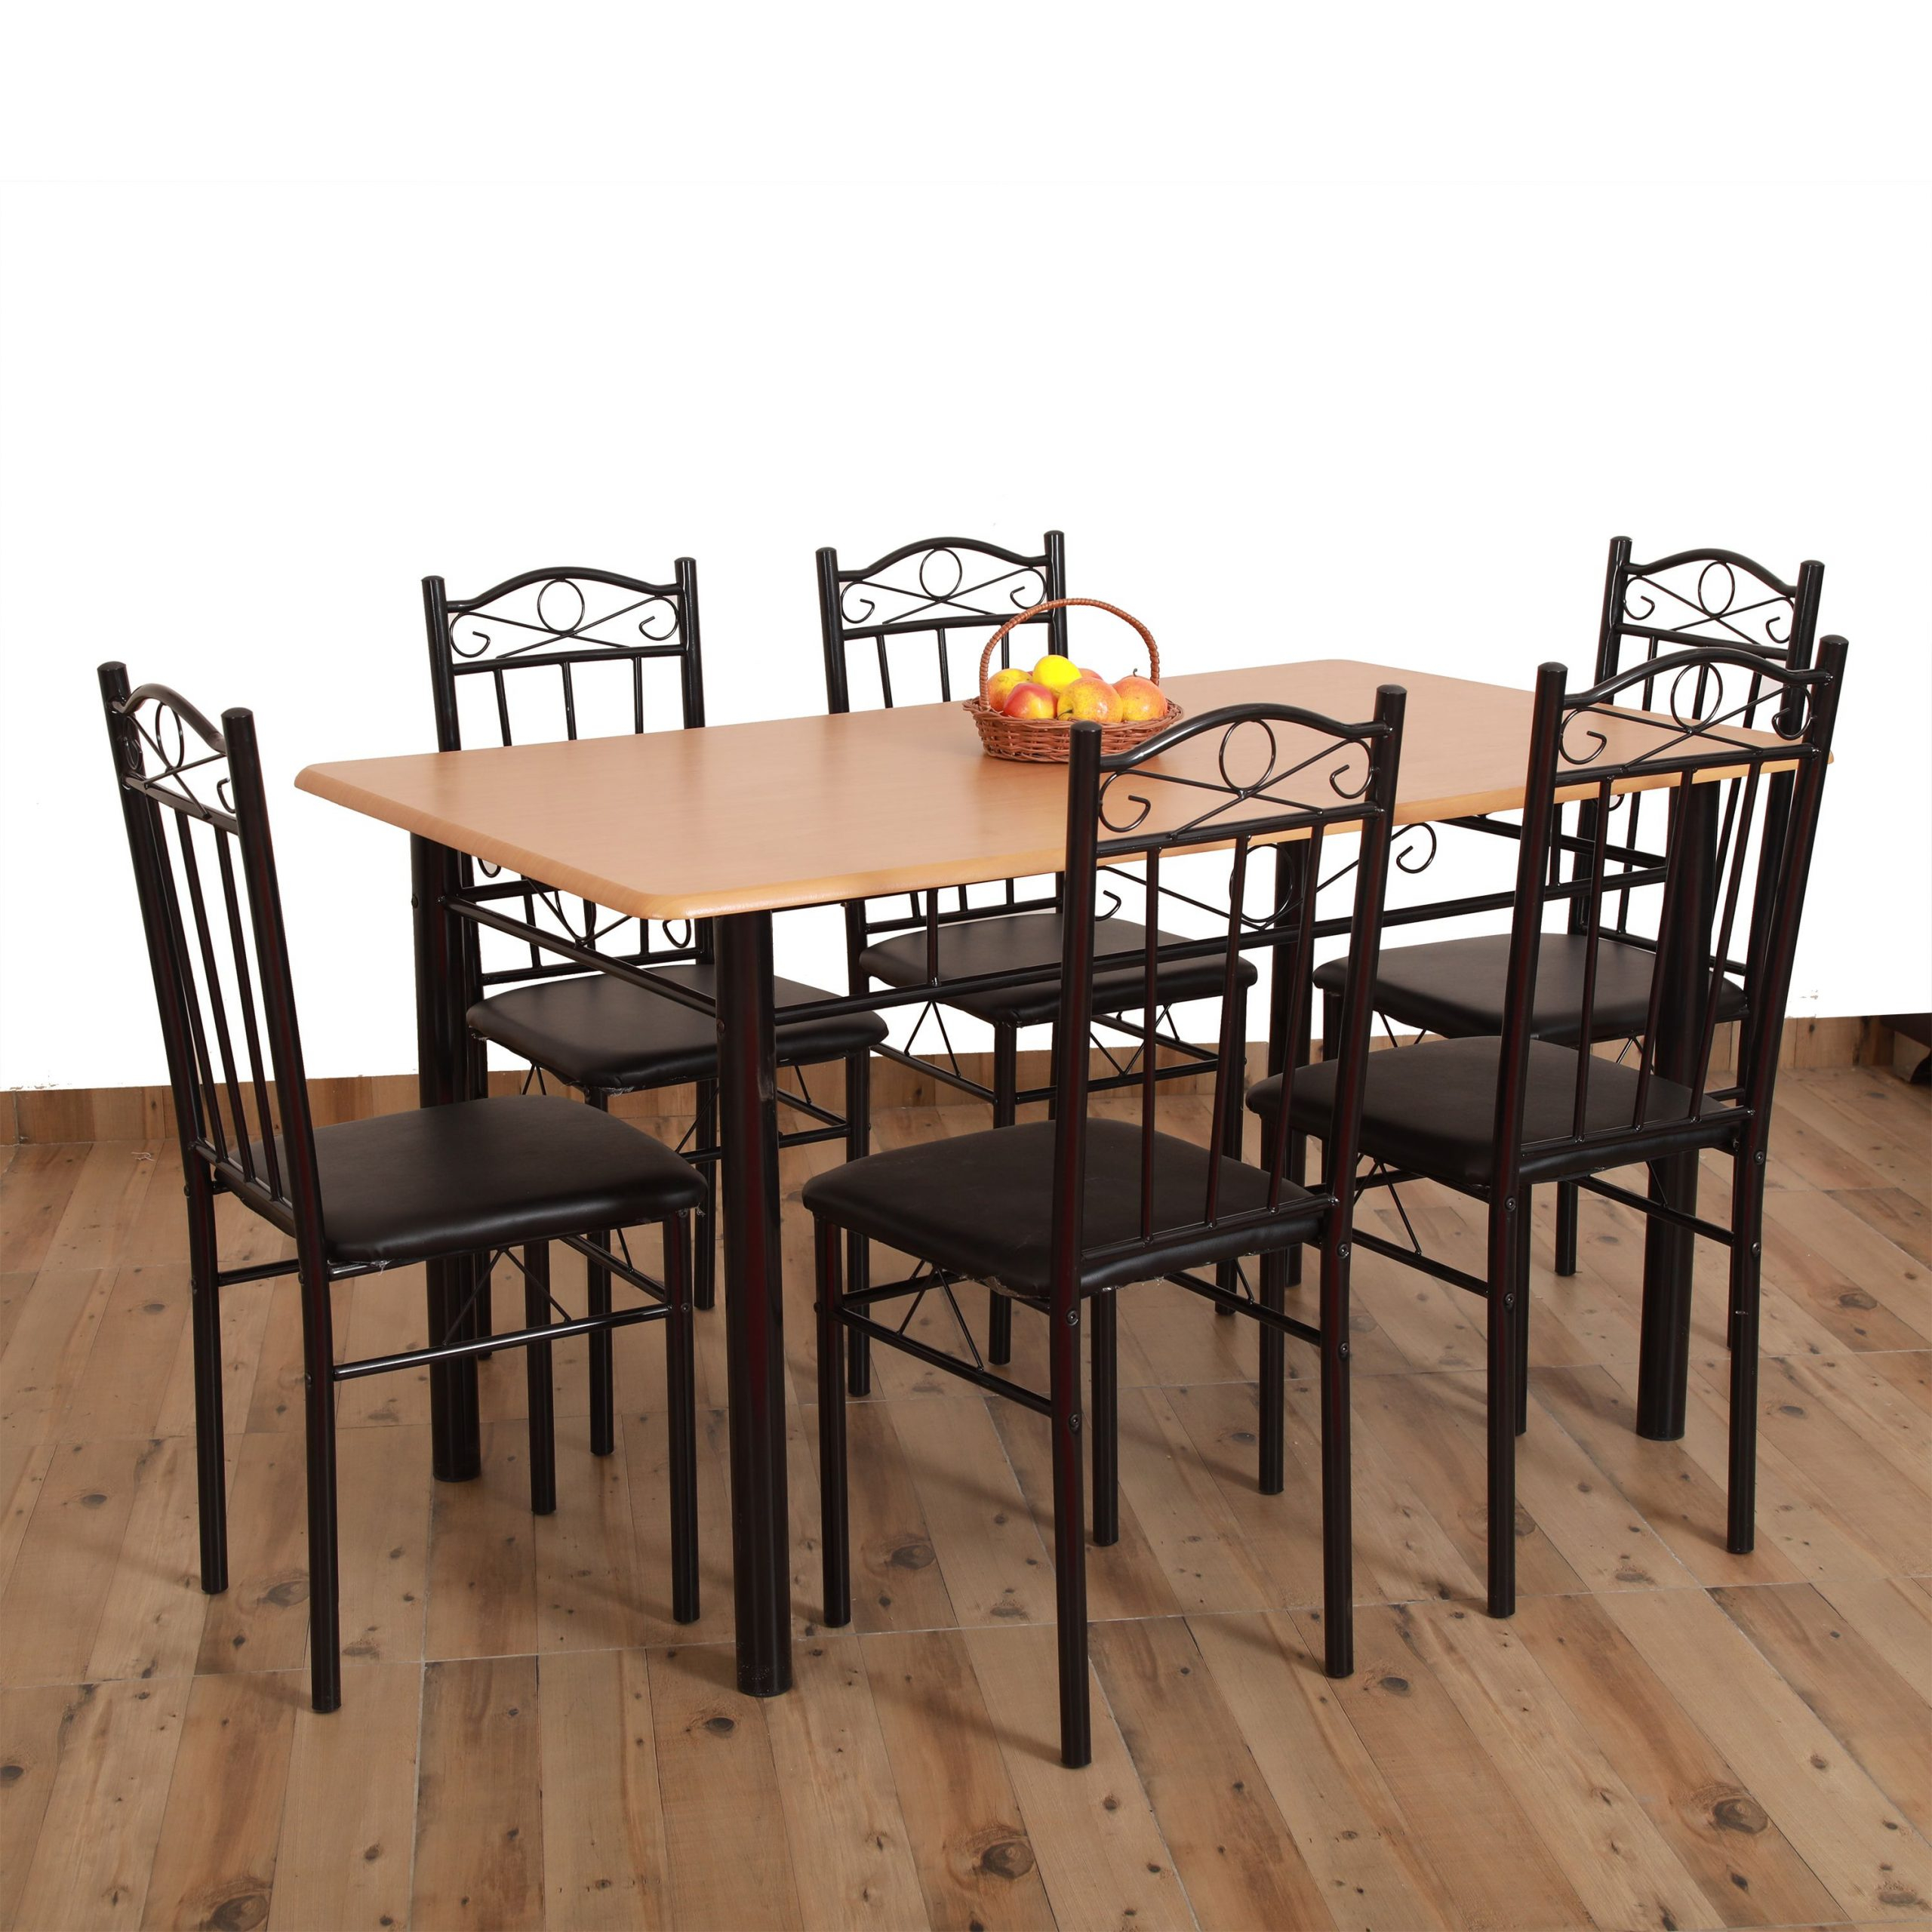 Dining Room Chair Seater Dining Table And Chairs Set Below for size 2560 X 2560